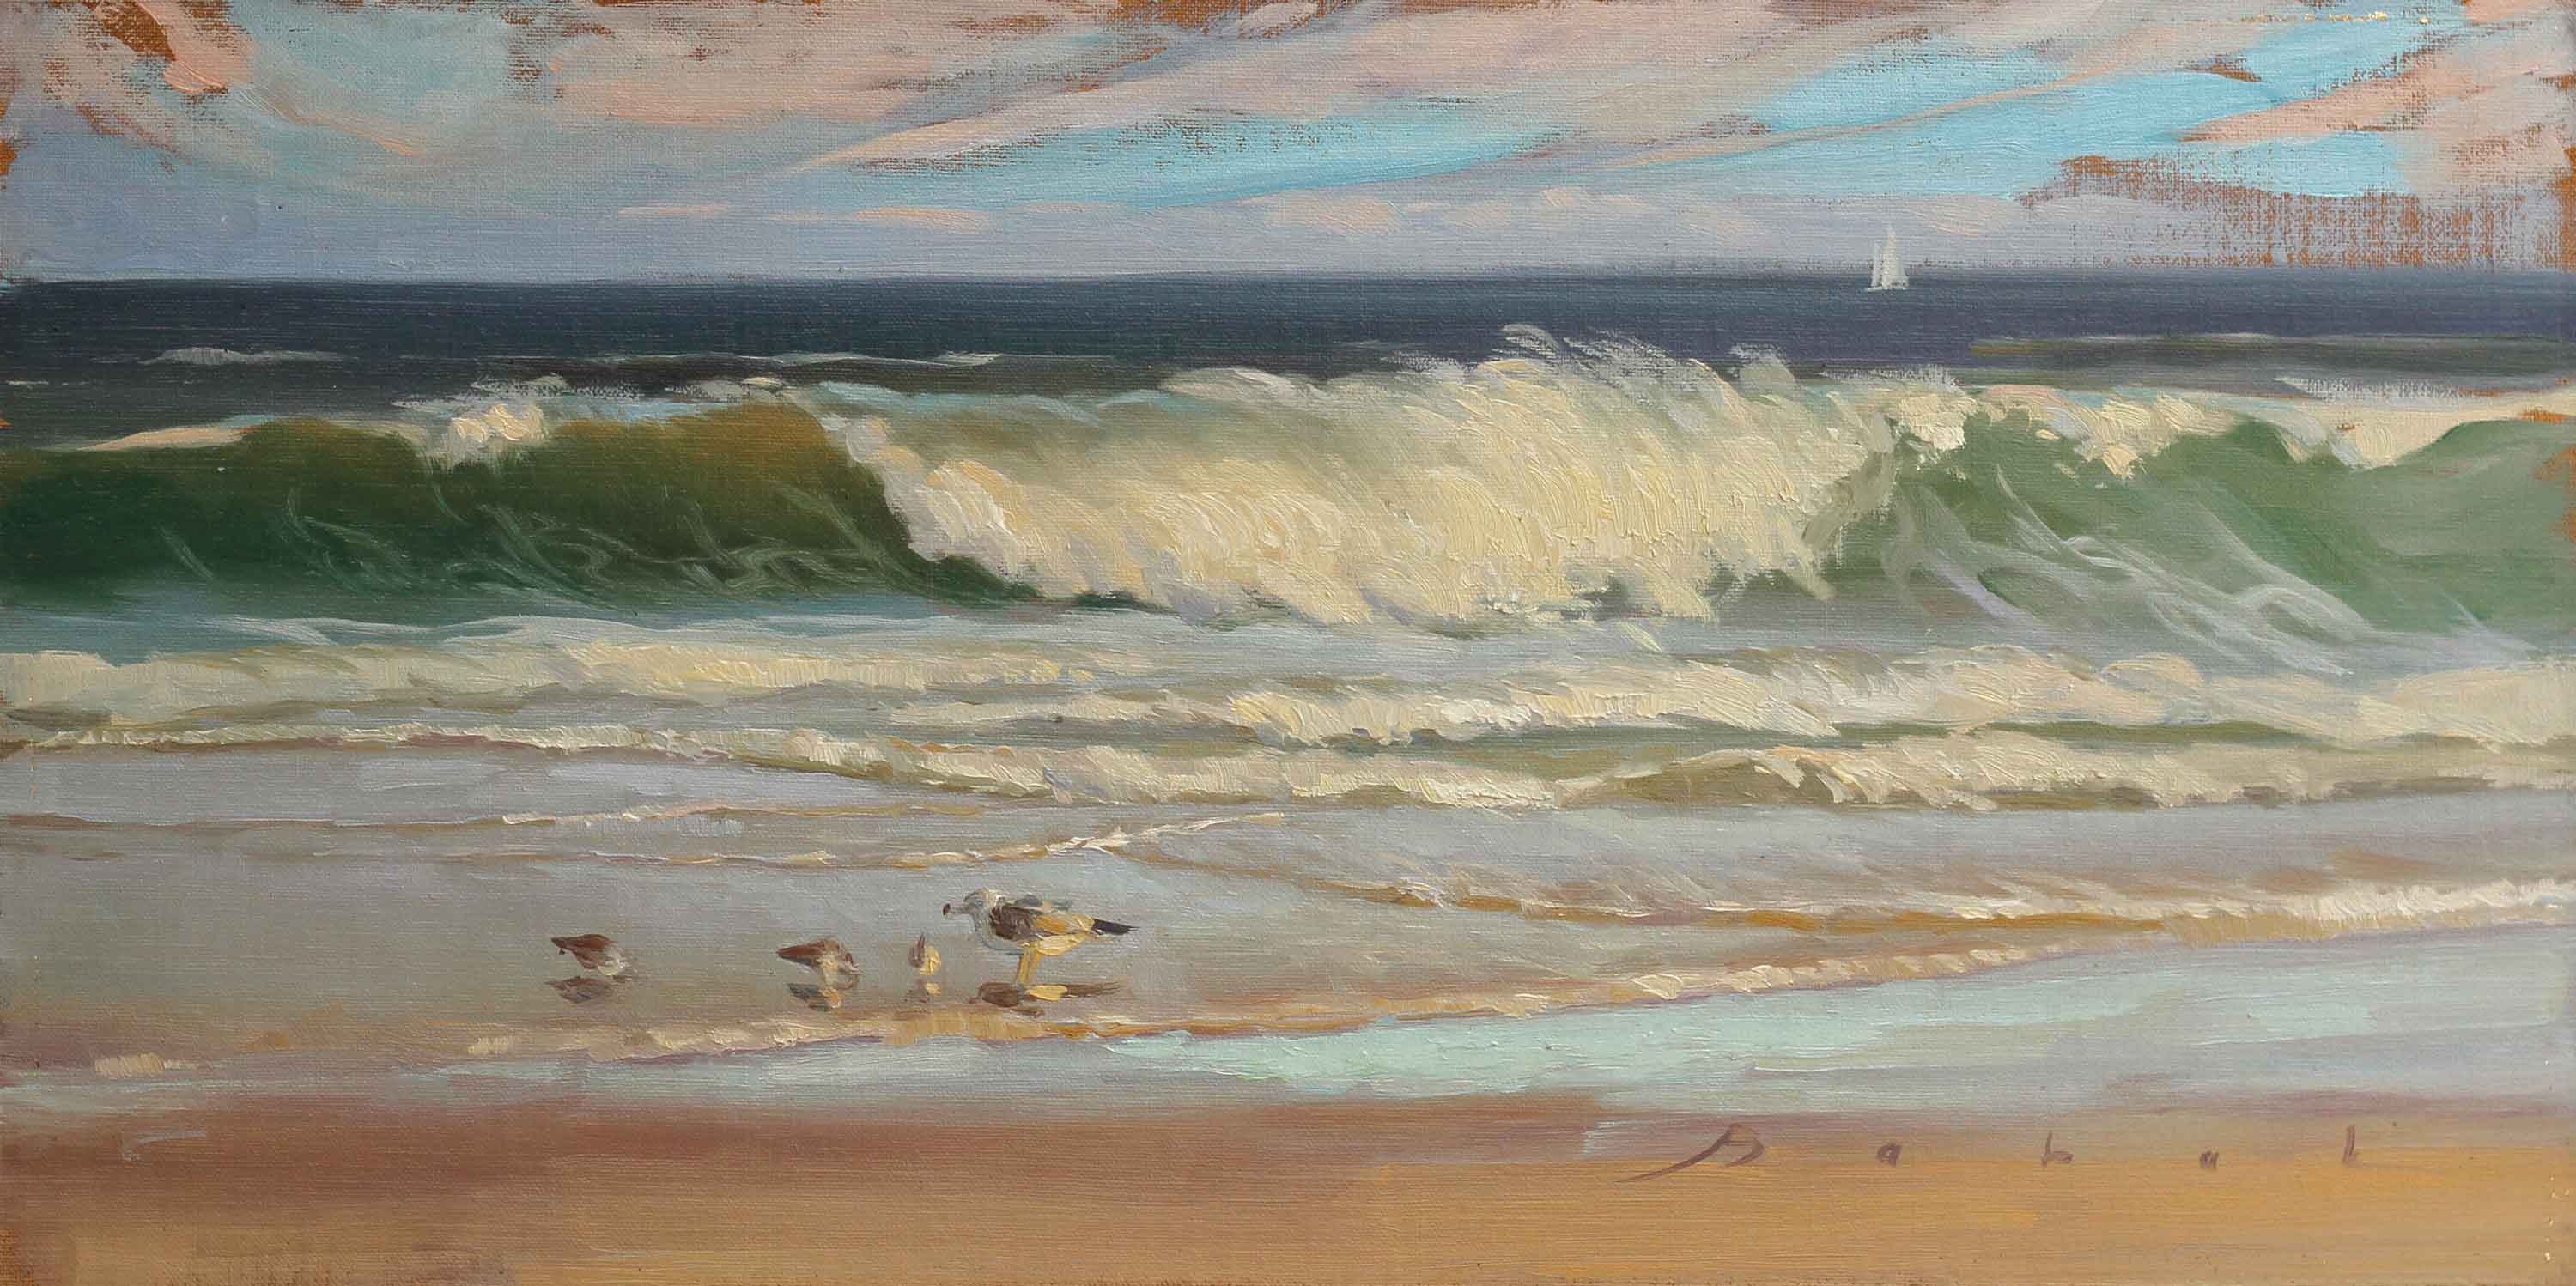 Download 7 Seascape Paintings to Inspire - OutdoorPainter